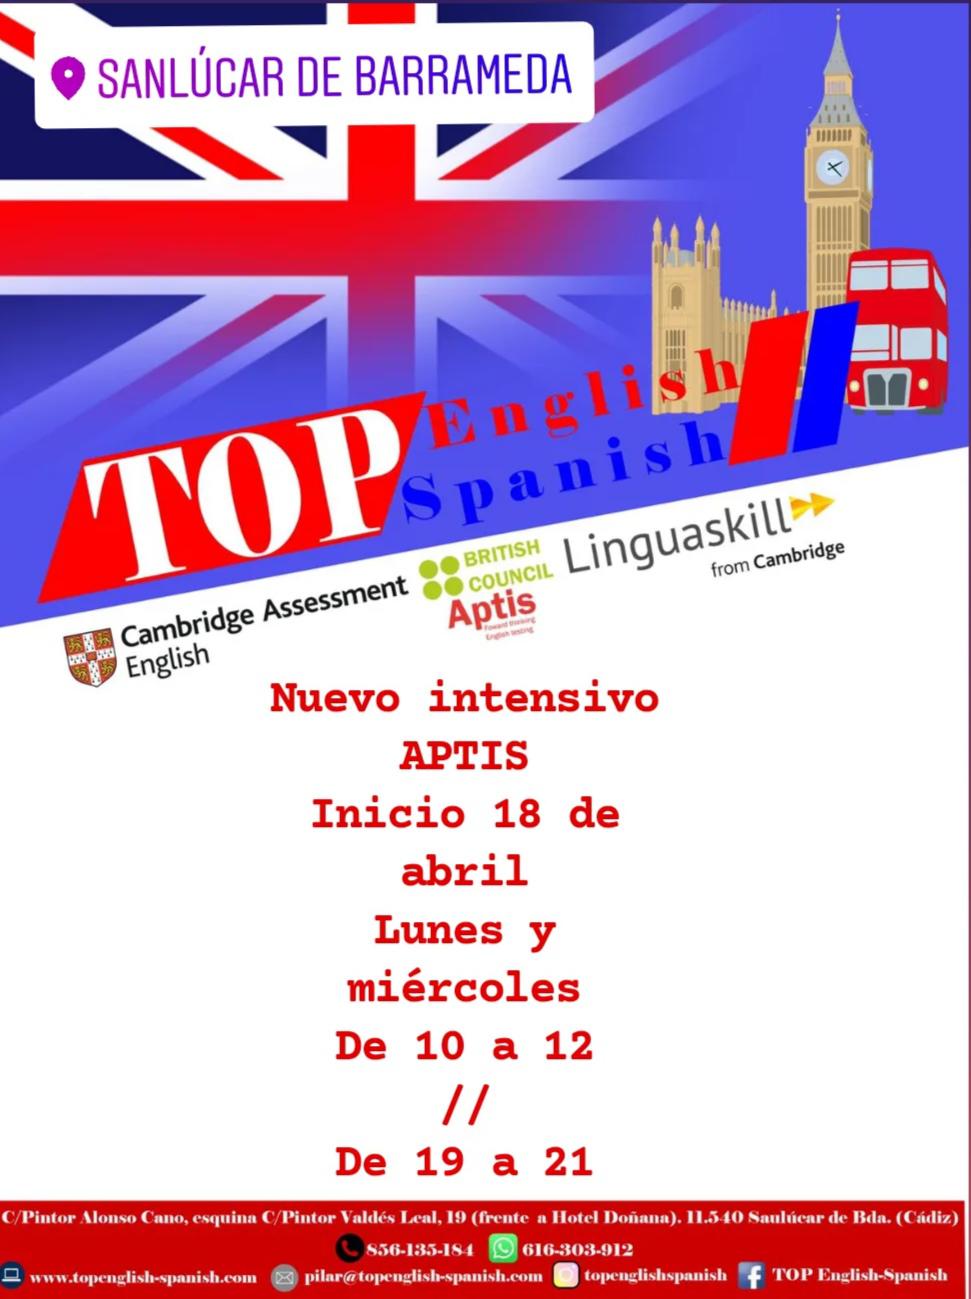 Images TOP English-Spanish